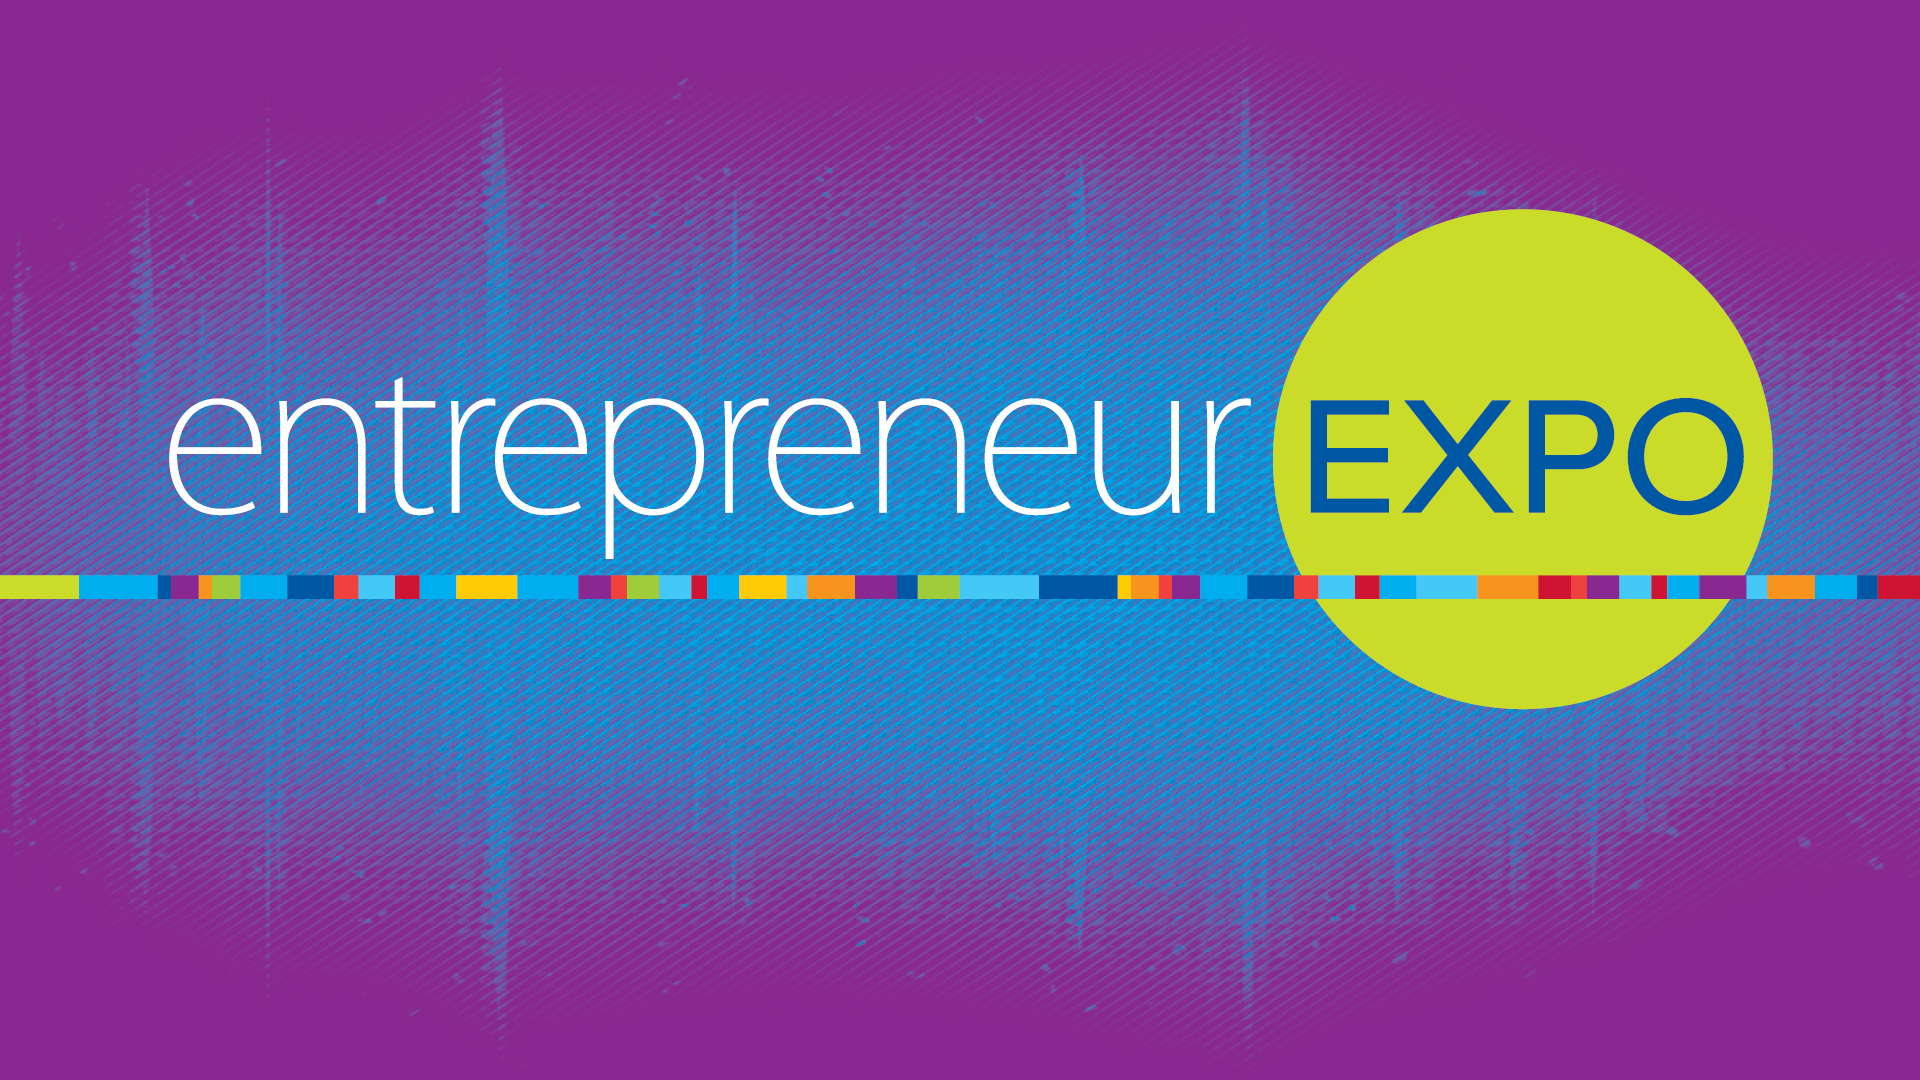 the words "entrepreneur expo" on a purple and blue background